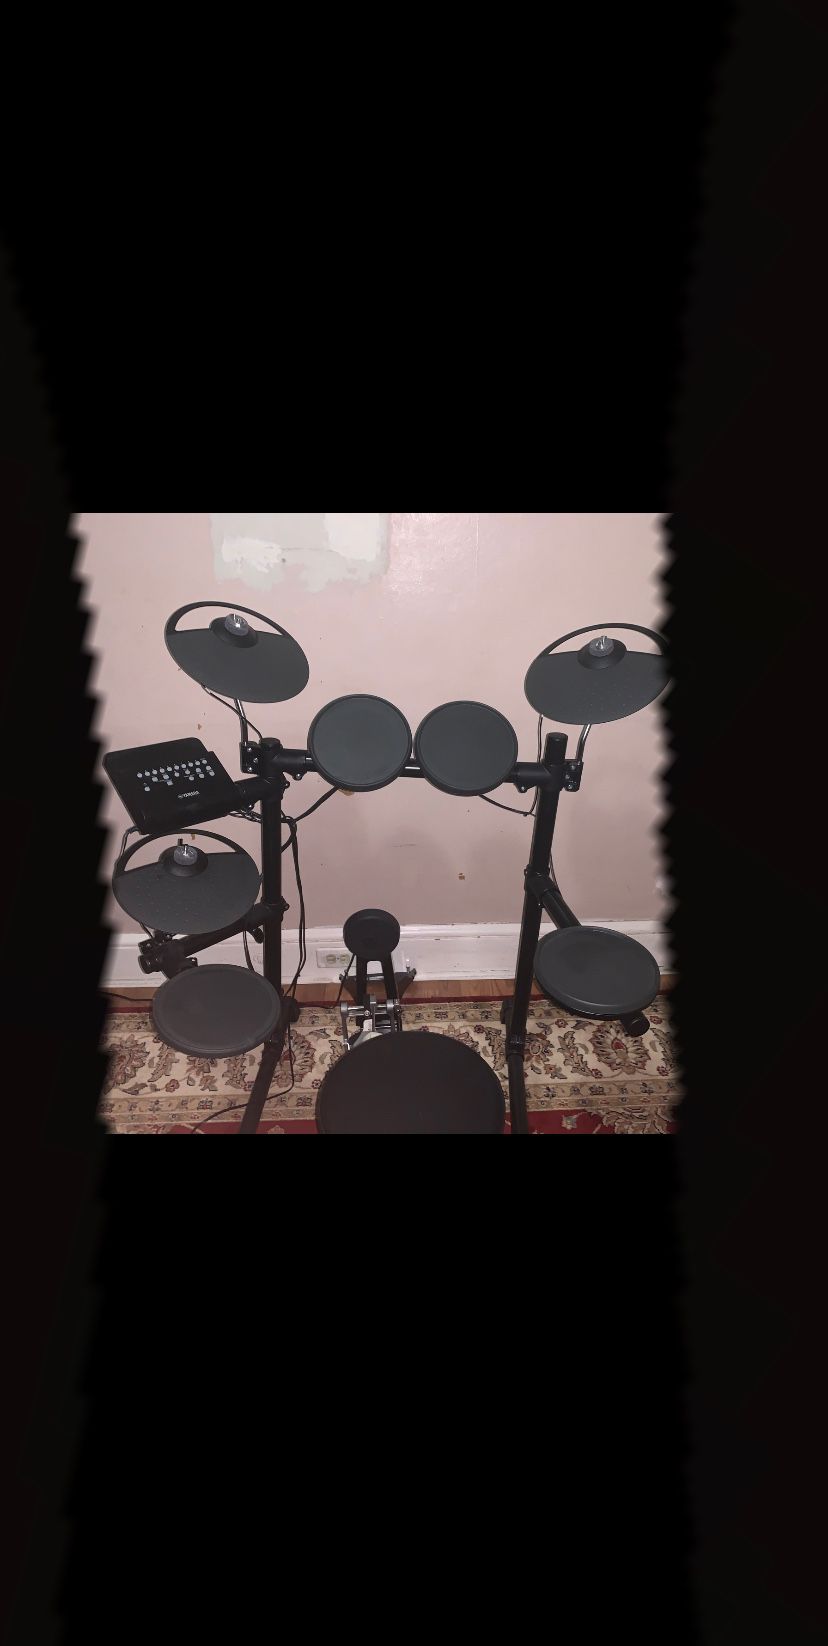 Yamaha DTX Electronic drum set for sale.